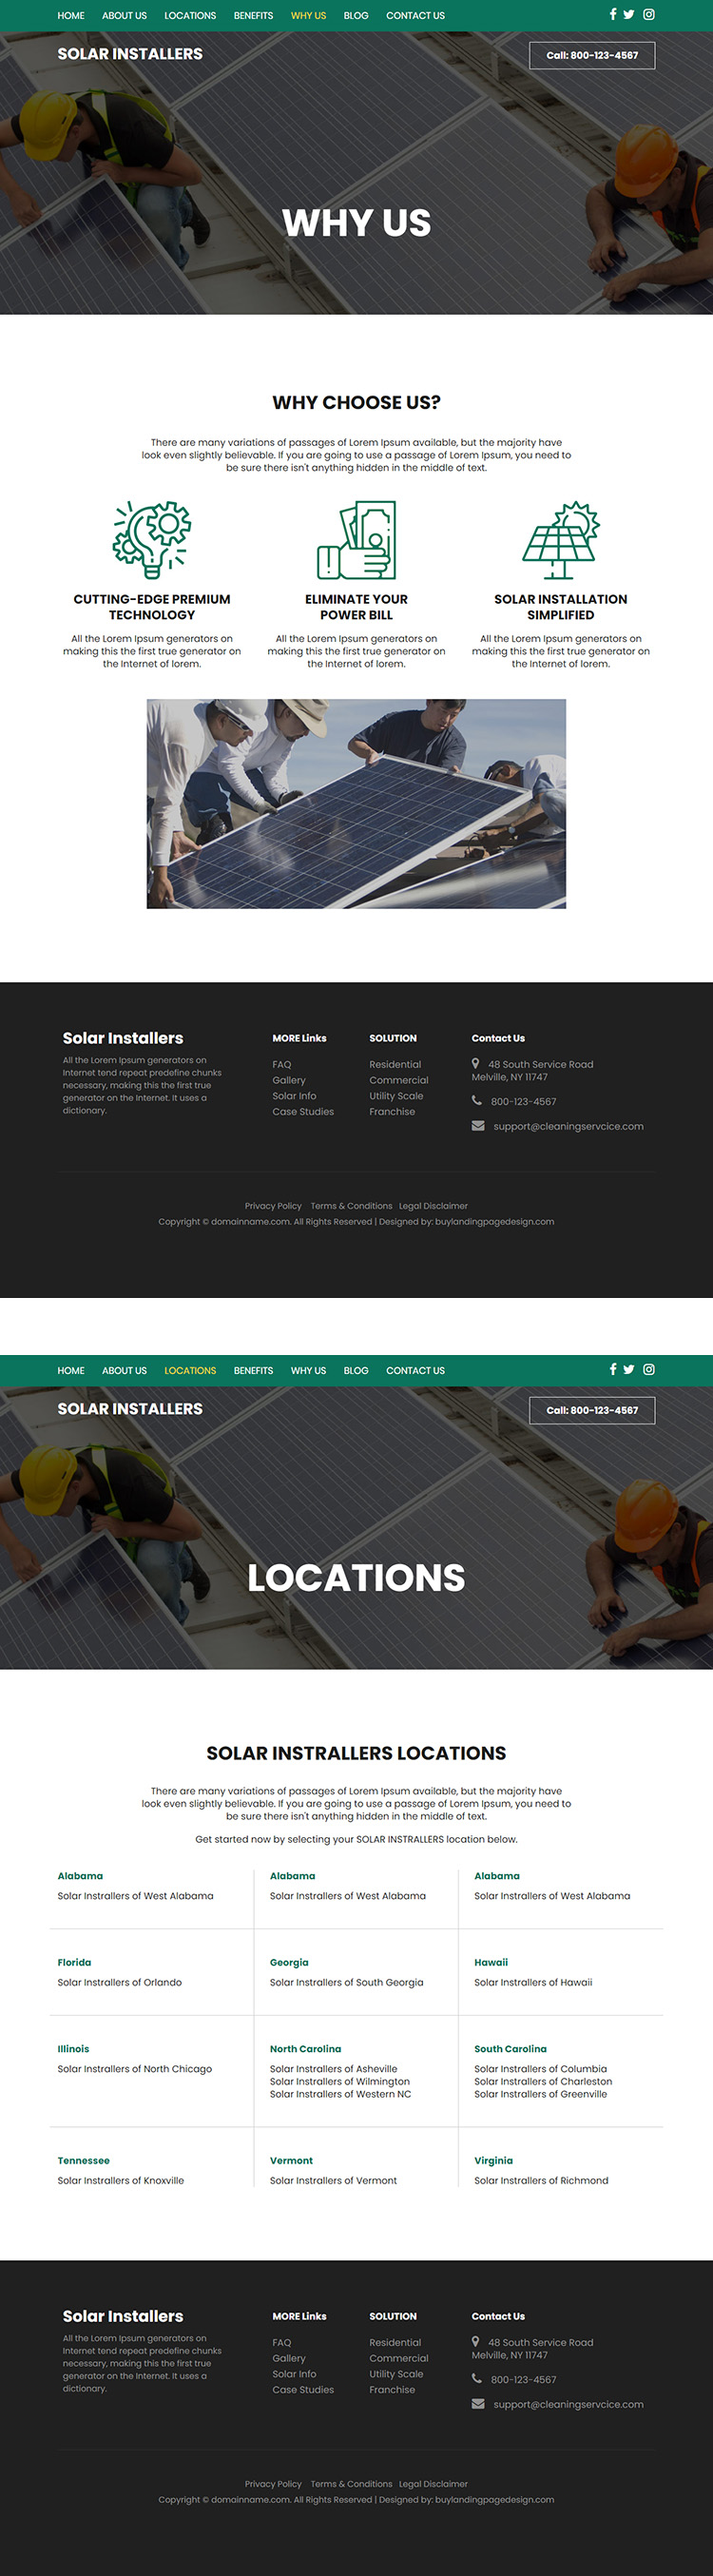 residential and commercial solar solutions website design